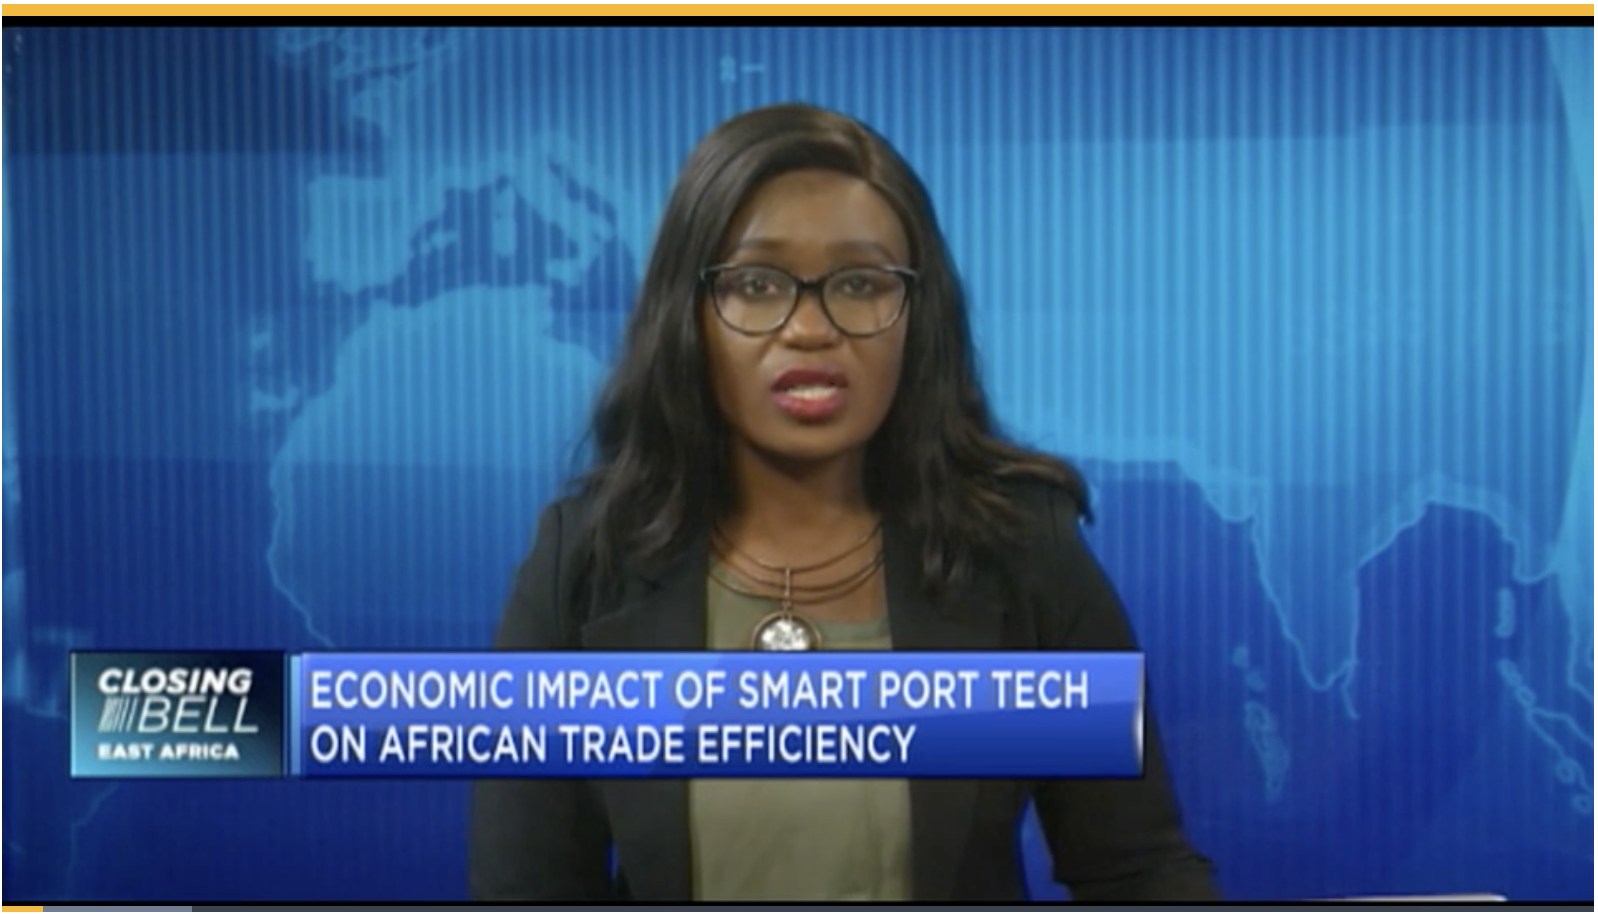 Economic impact of smart port technologies on African trade efficiency